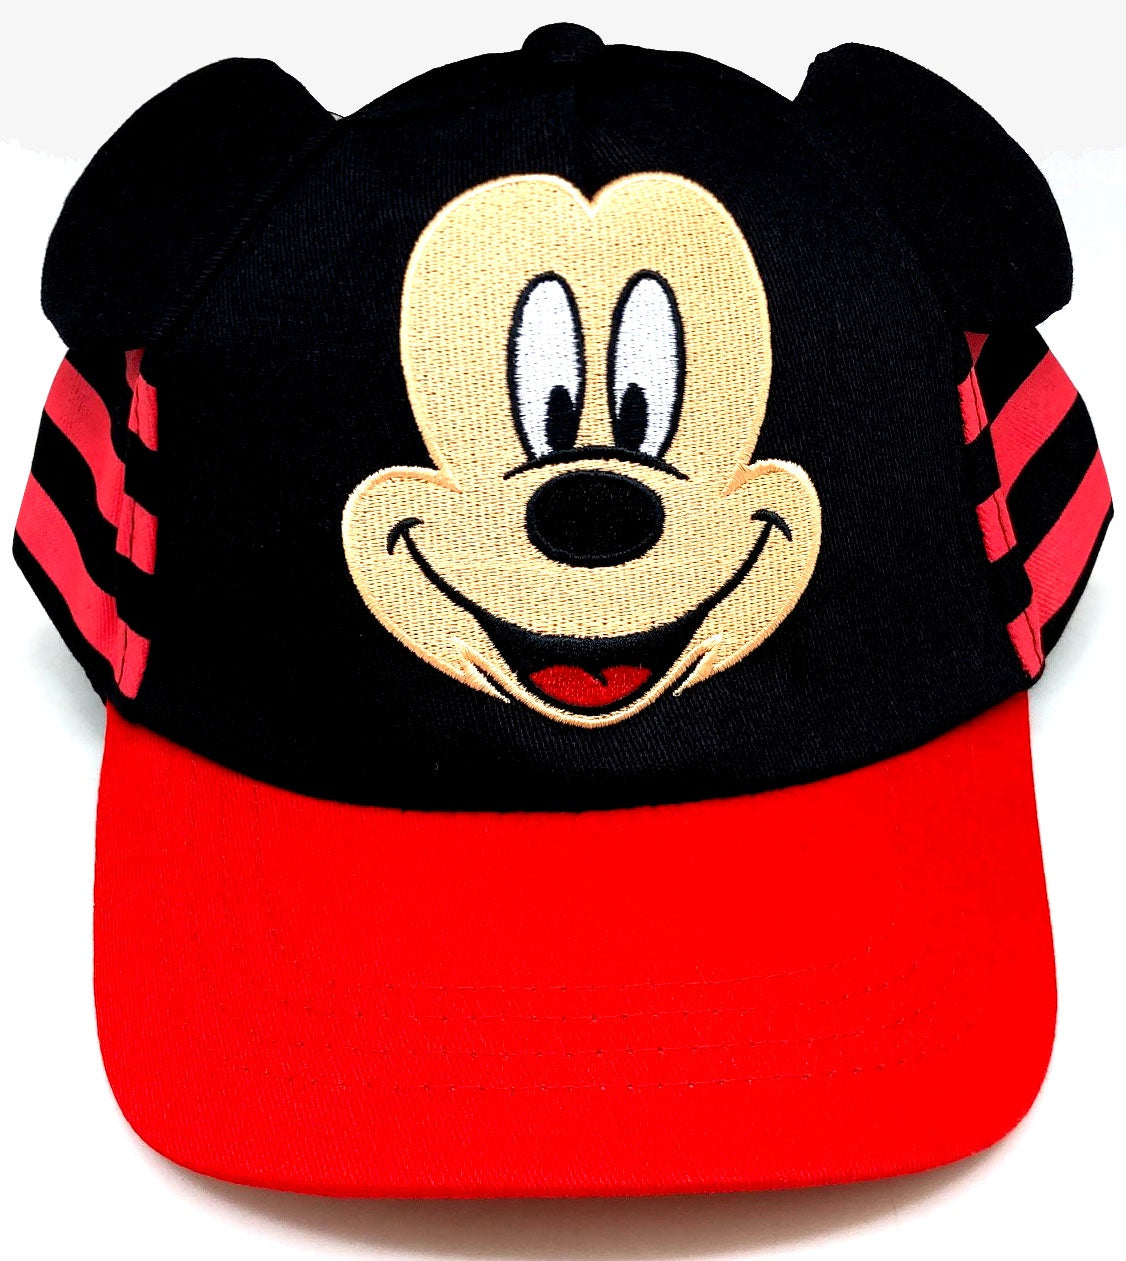 Mickey 3-D Ears Cap W/Embroidery Details